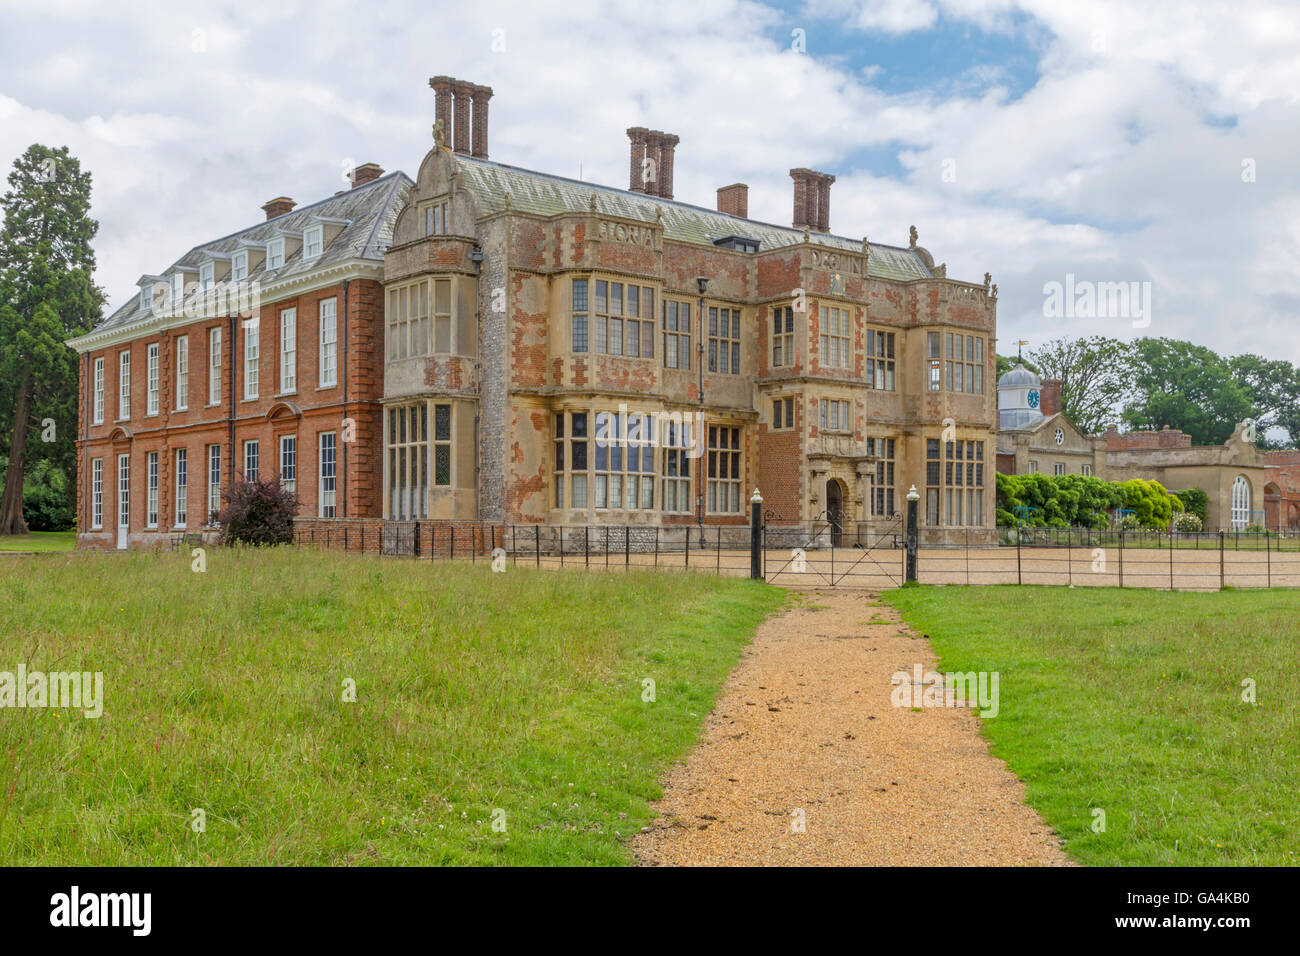 Felbrigg Hall, a 17th-century country house ( Jacobean architecture ) located in Felbrigg, Norfolk, England, United Kingdom. Stock Photo